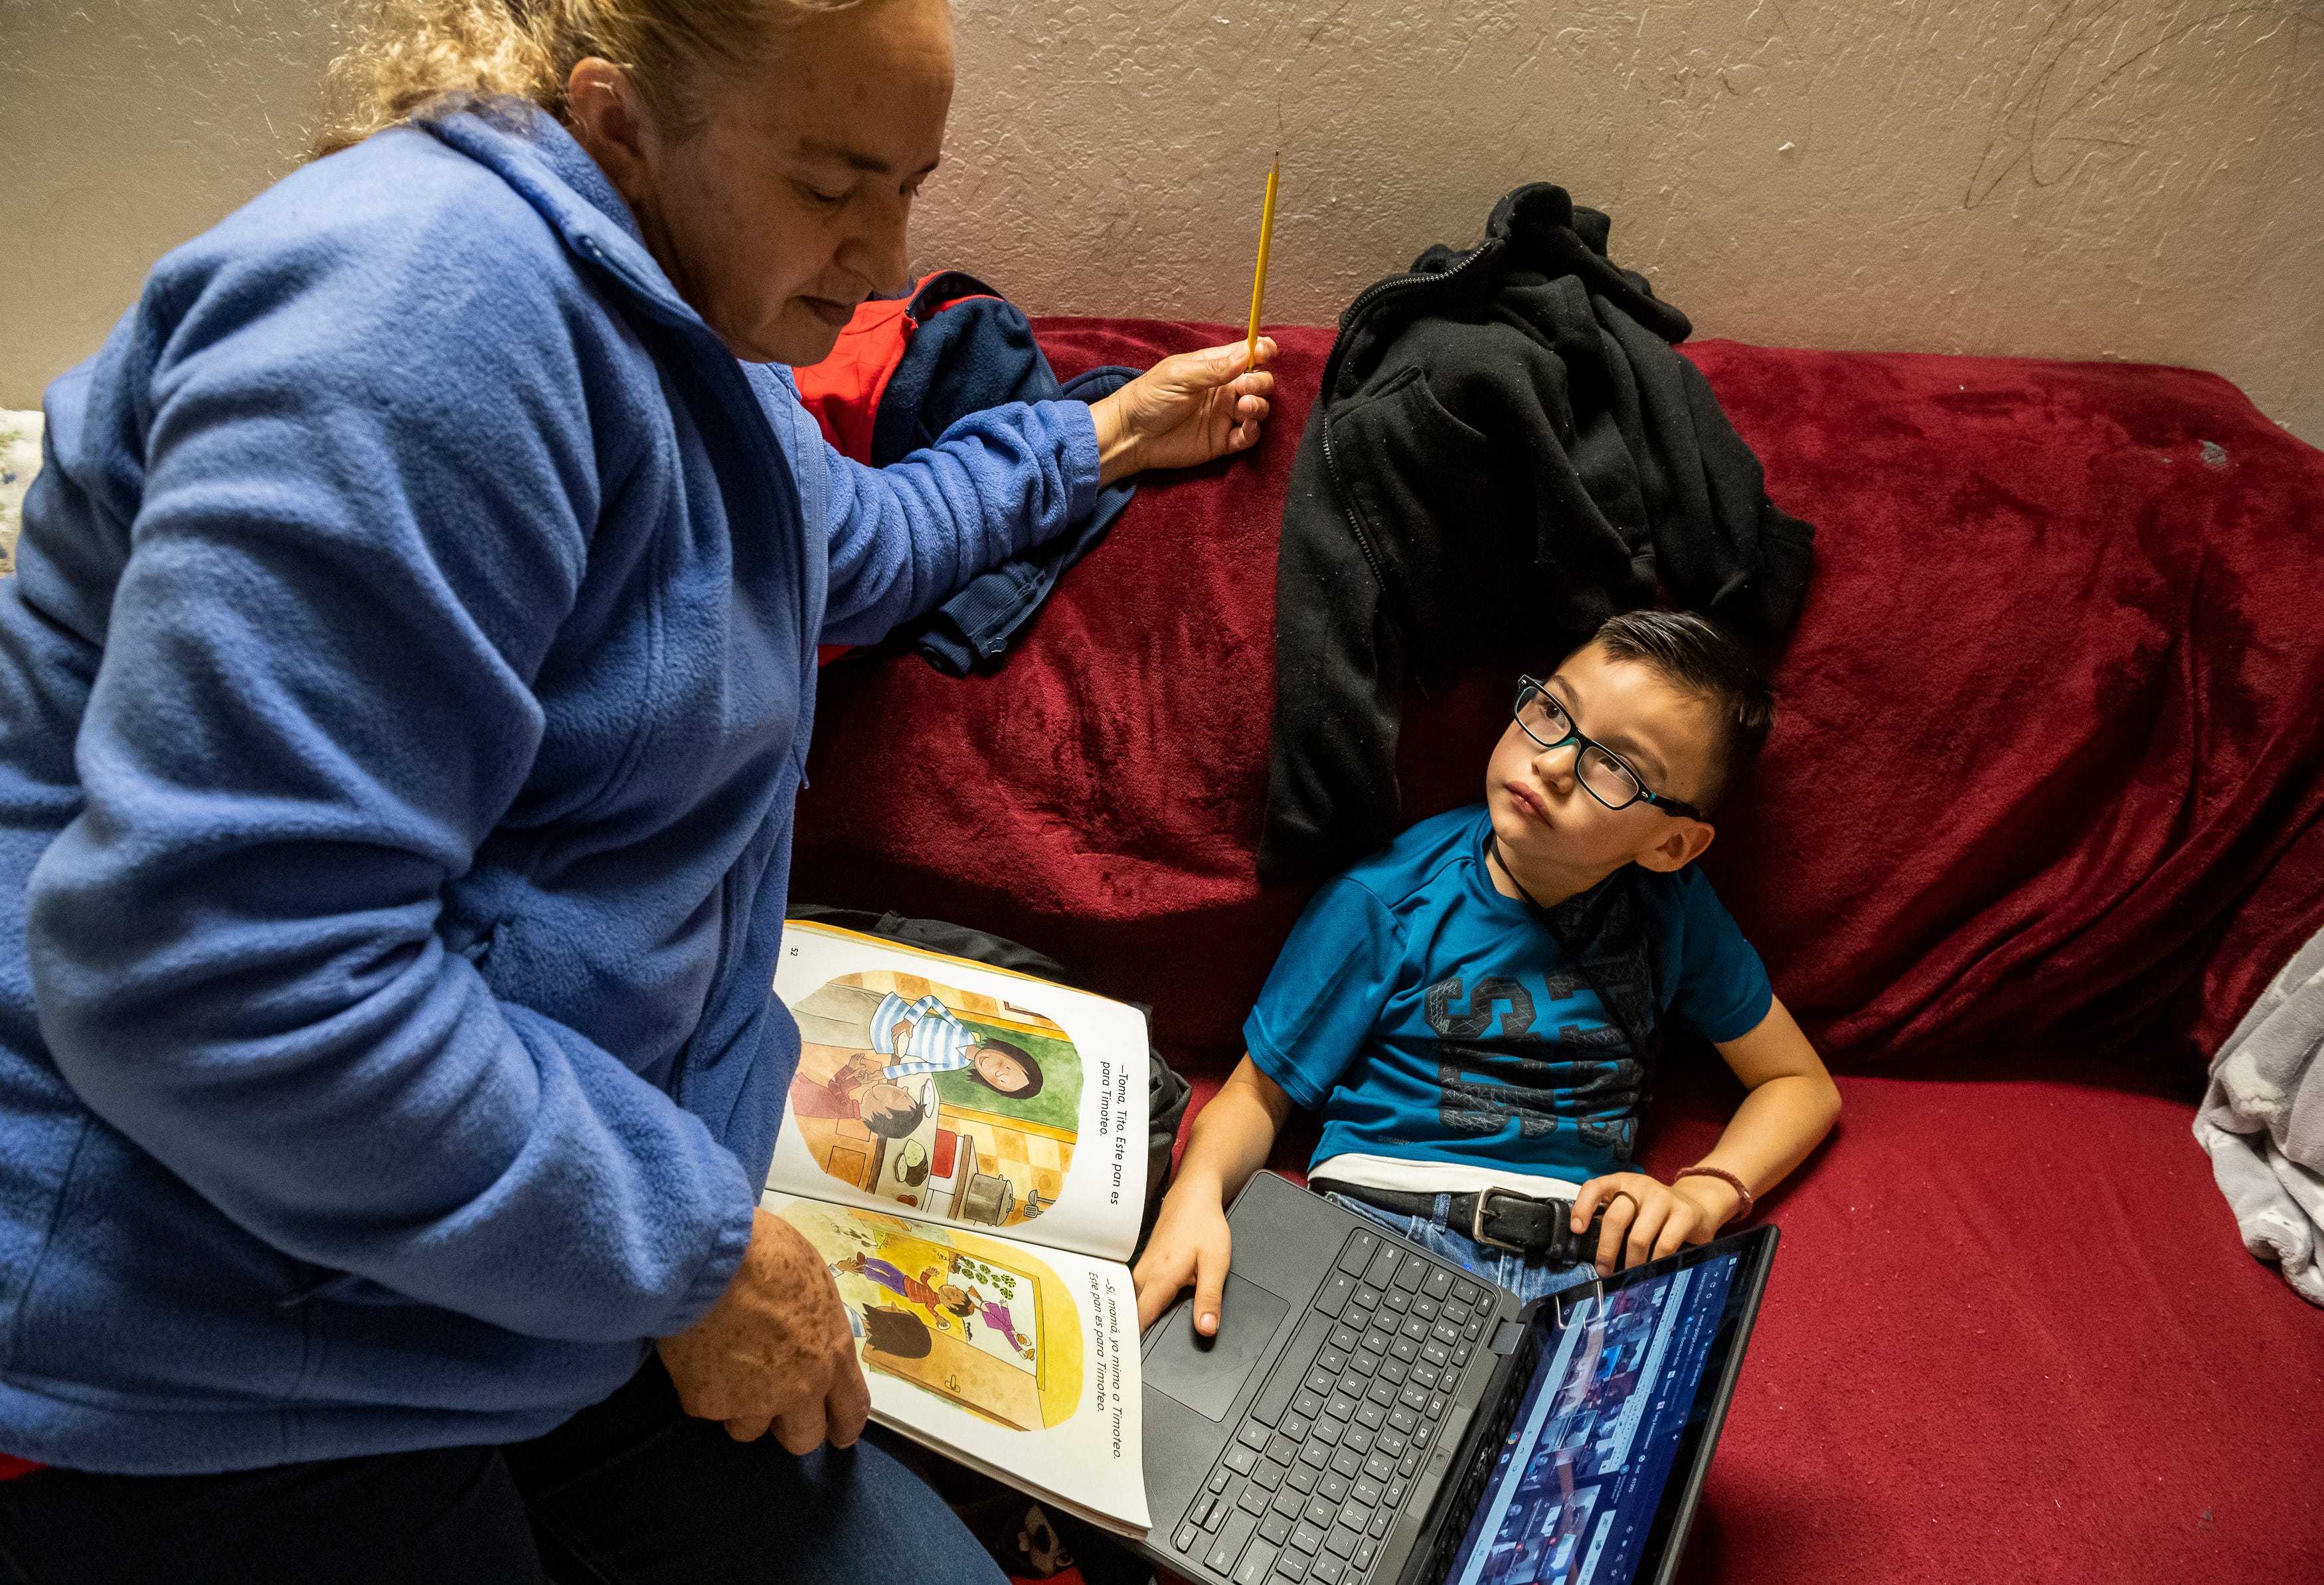 Eufemia "Jenni" Aguilar, helps her grandson Kender Ricardez Tobon read a book during Tobon's virtual class, as they both sit on a sofa at Tobon's babysitter's home in Salinas, Calif., on Thursday, Sept. 17, 2020.